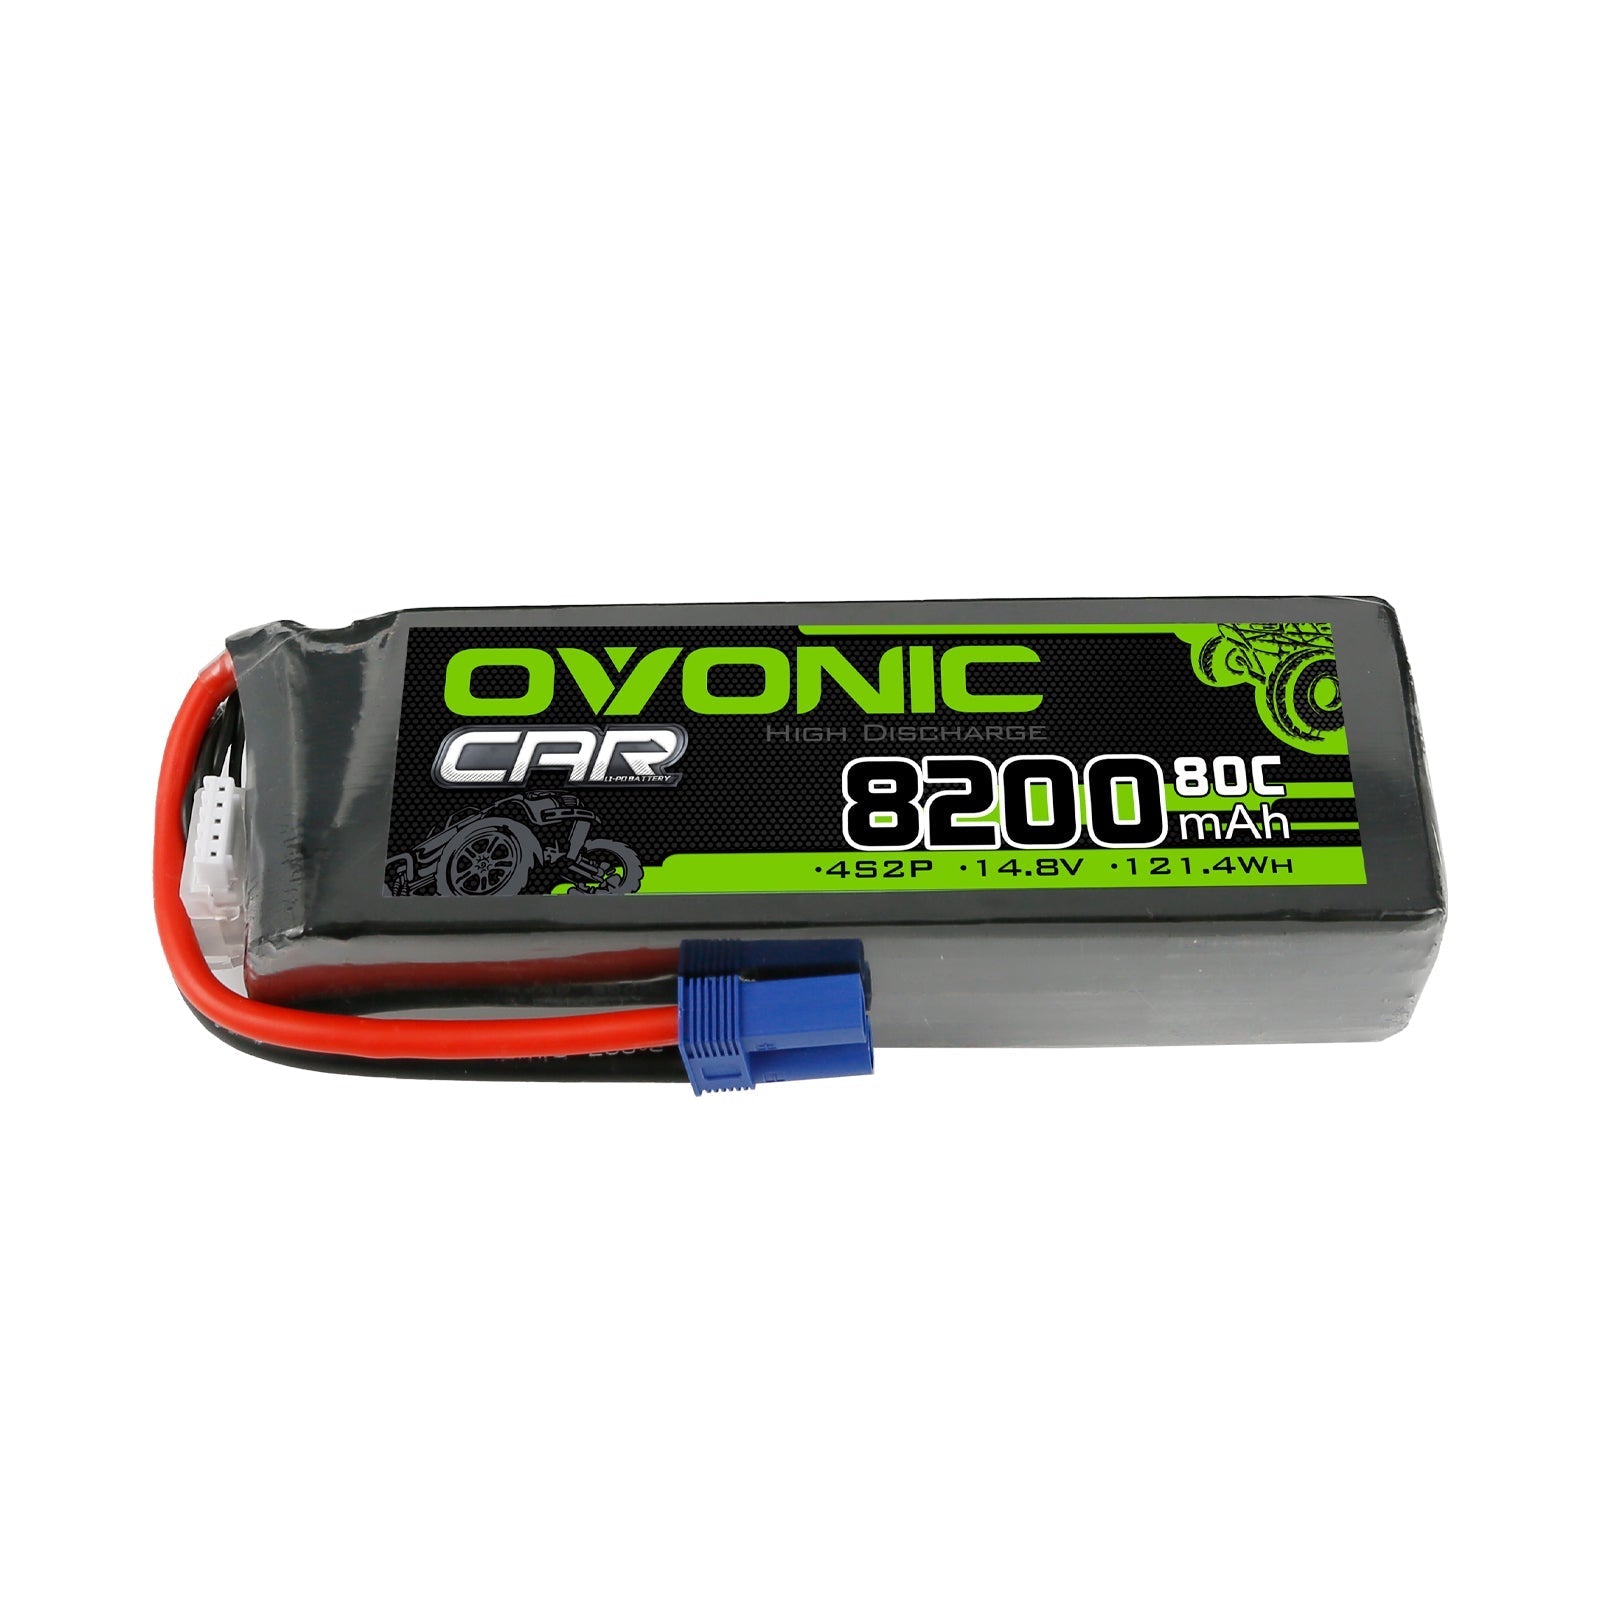 Ovonic 80C 4S2P 8200mAh 14.8V LiPo Battery Pack With EC5 Plug For Arrma 1/5 8S Car - Ampow